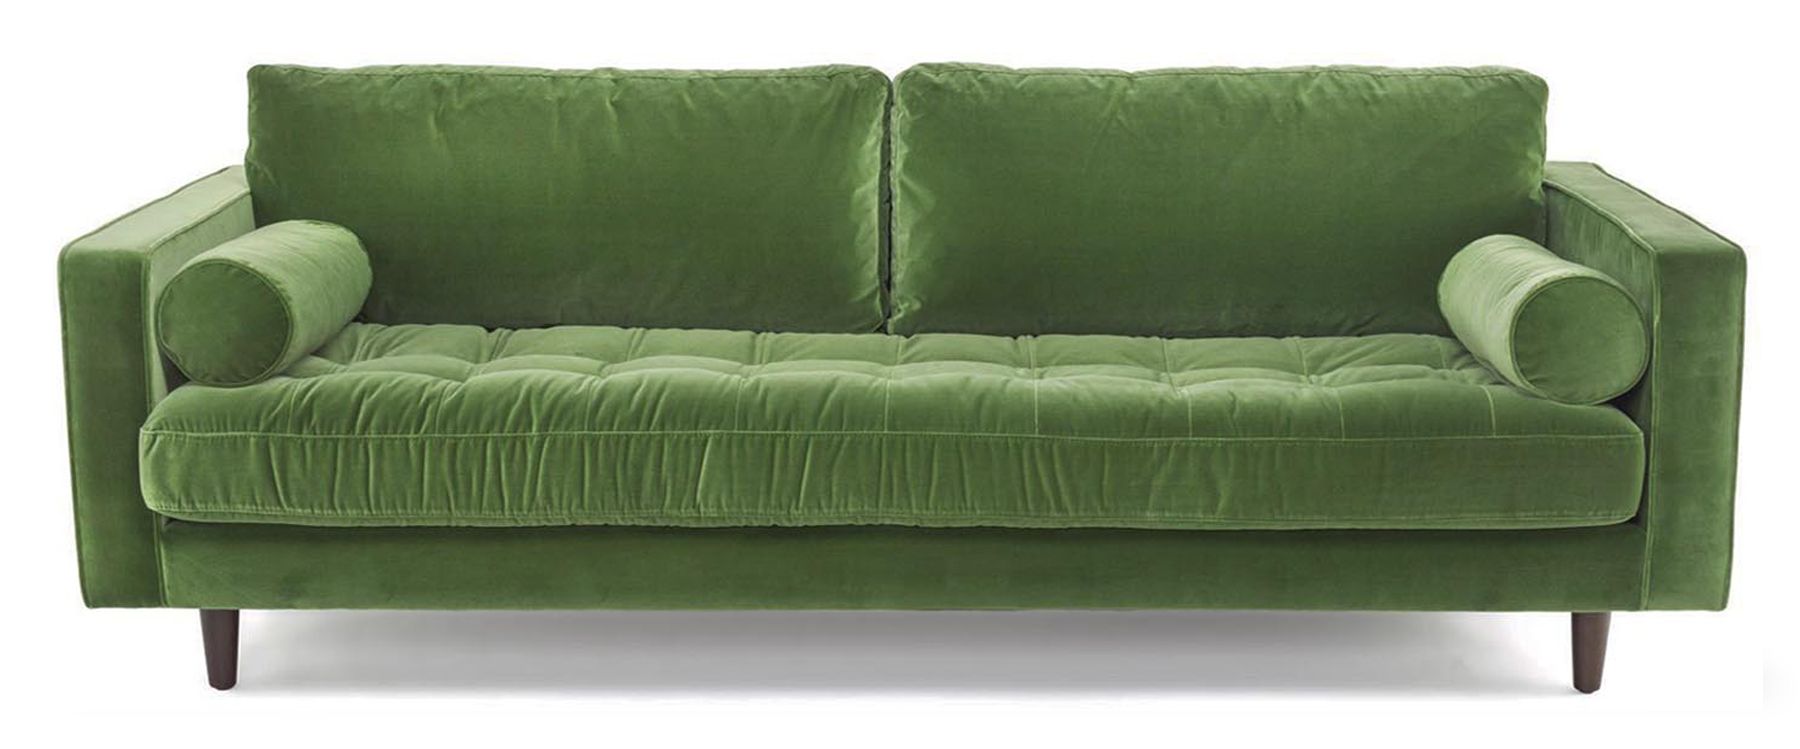 What Goes With A Green Velvet Sofa